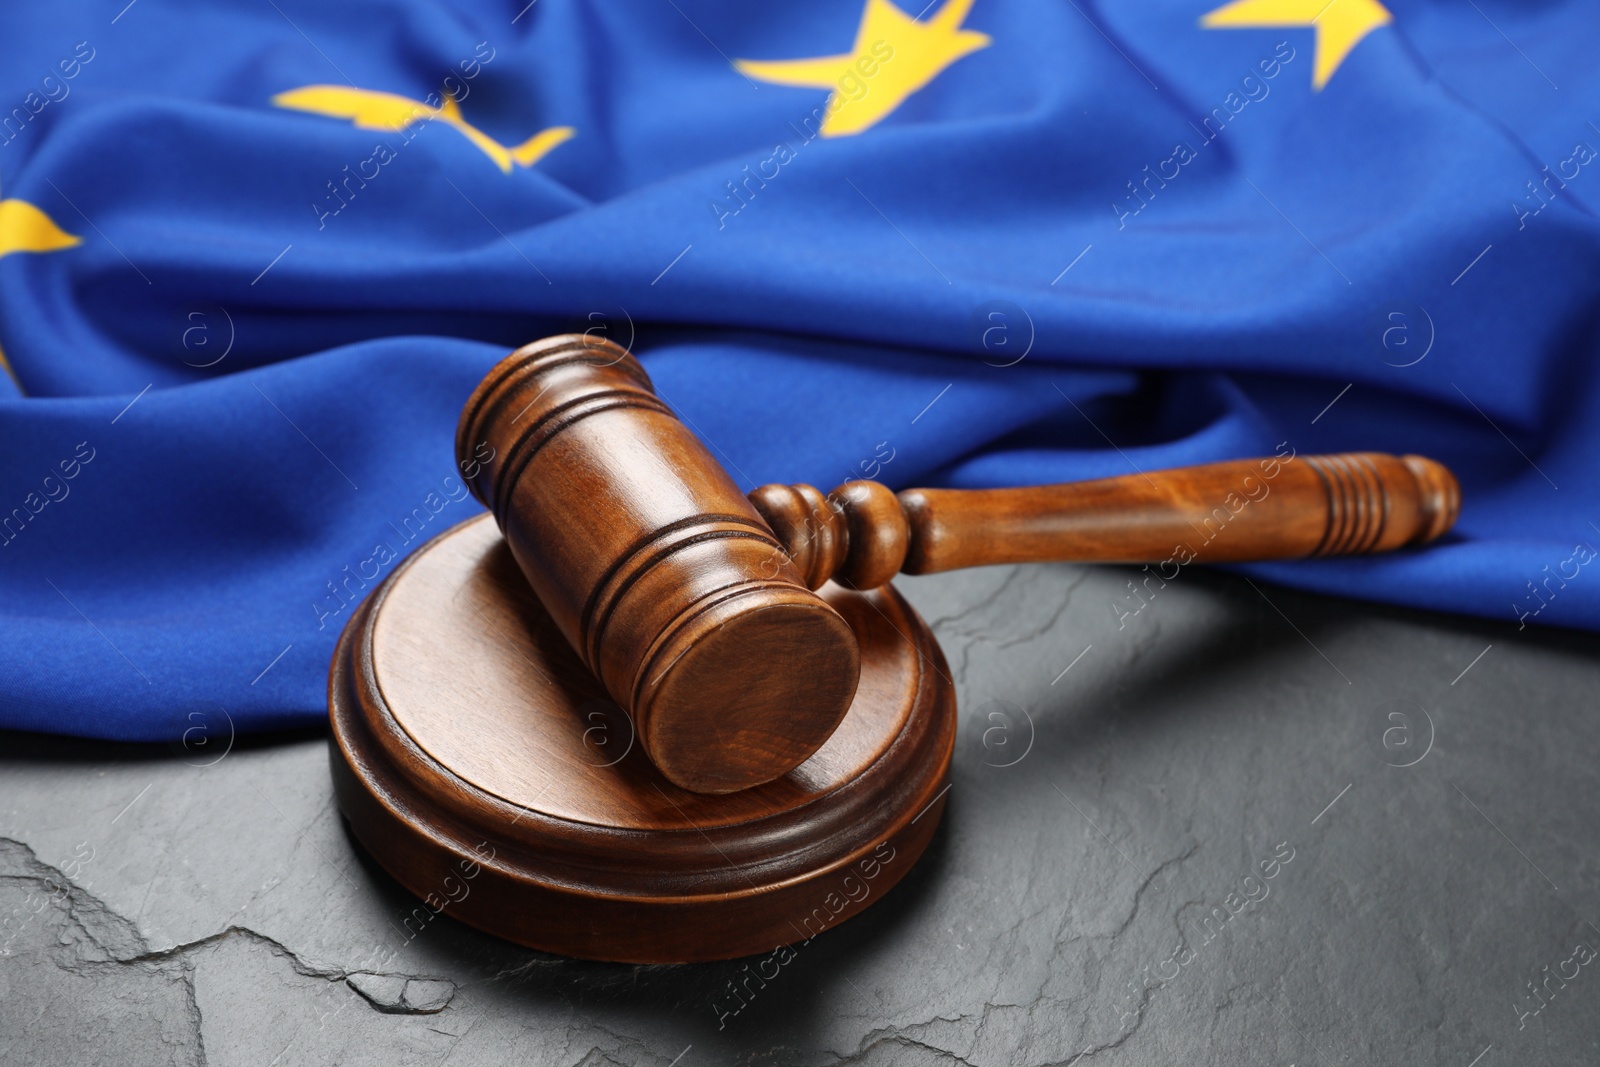 Photo of Wooden judge's gavel and flag of European Union on black table